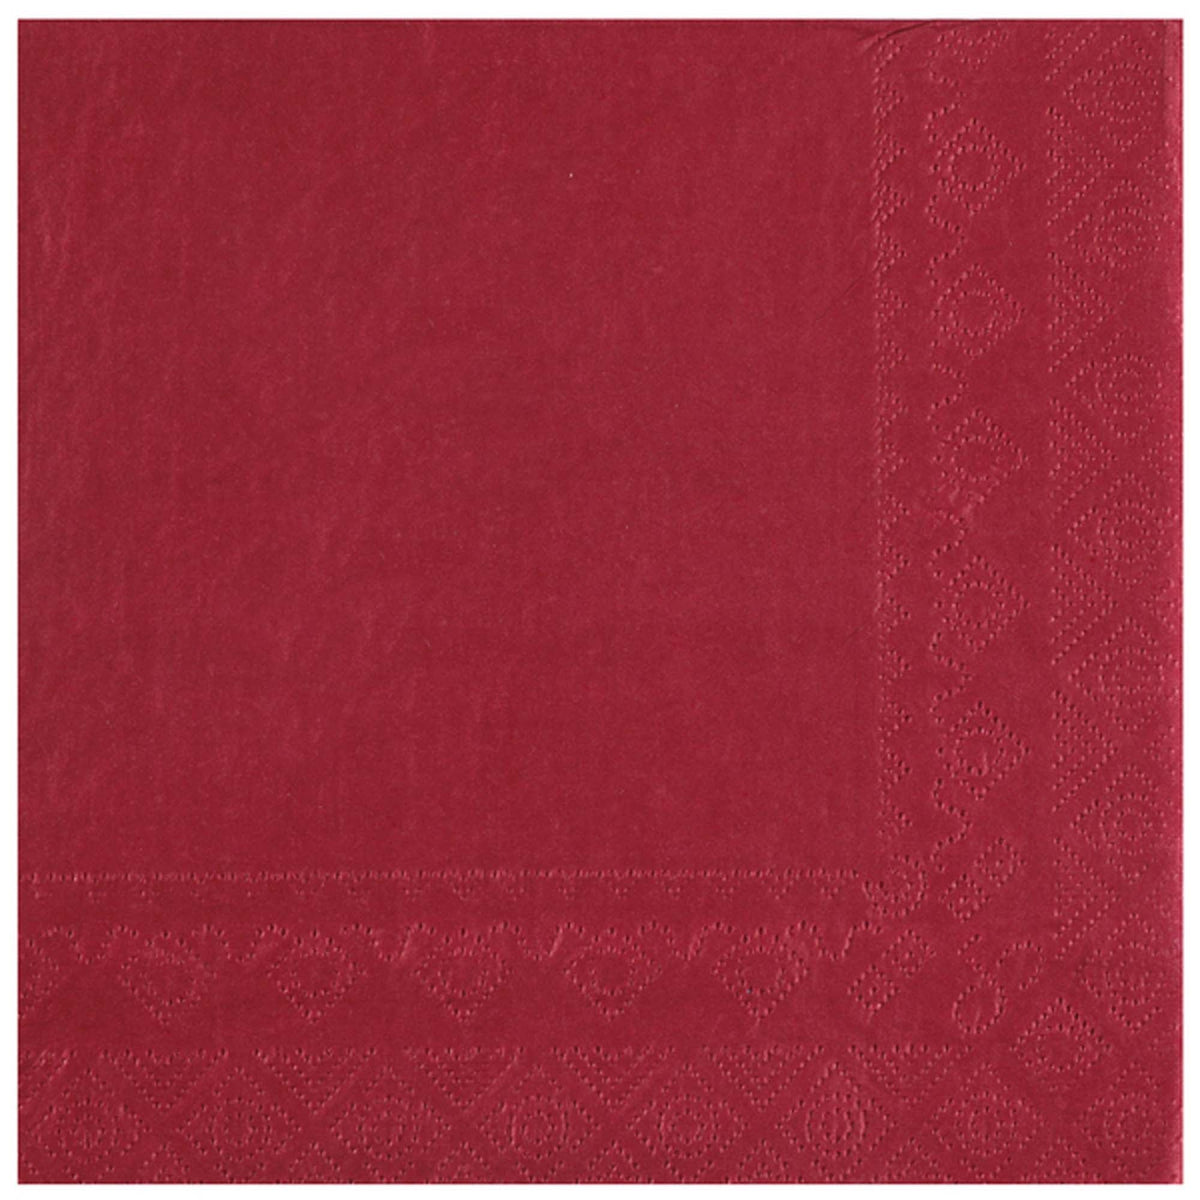 SANTEX Everyday Entertaining Burgundy Red Large Lunch Paper Party Napkins, 25 Count 3660380090151